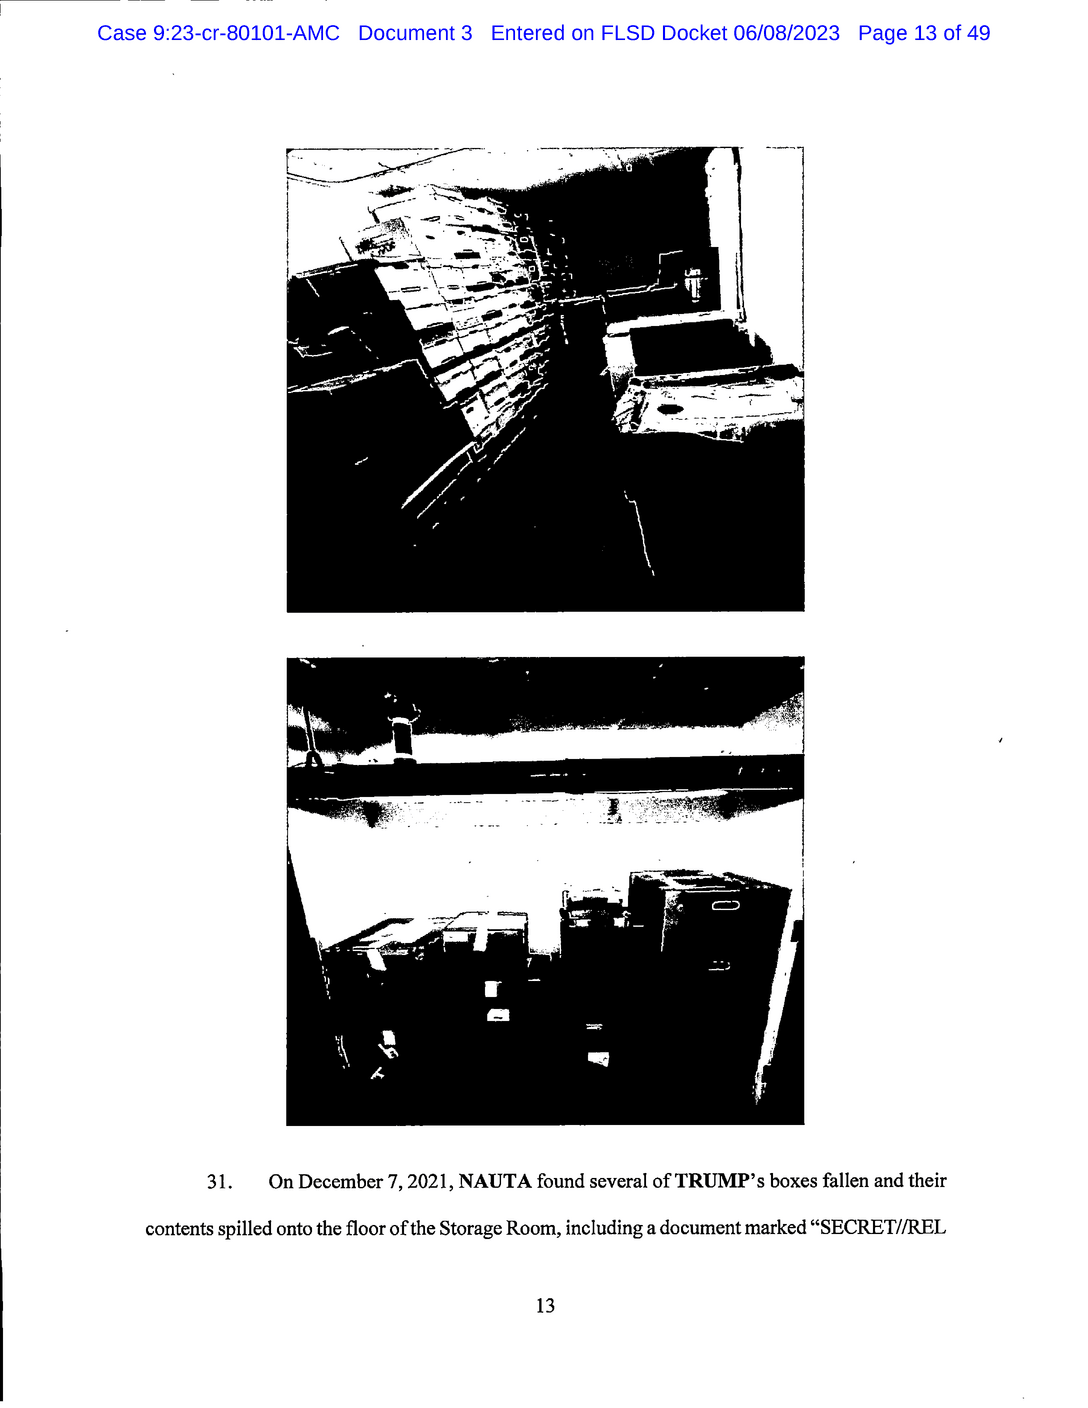 Page 13 of Donald Trump Classified Documents Indictment PDF document.